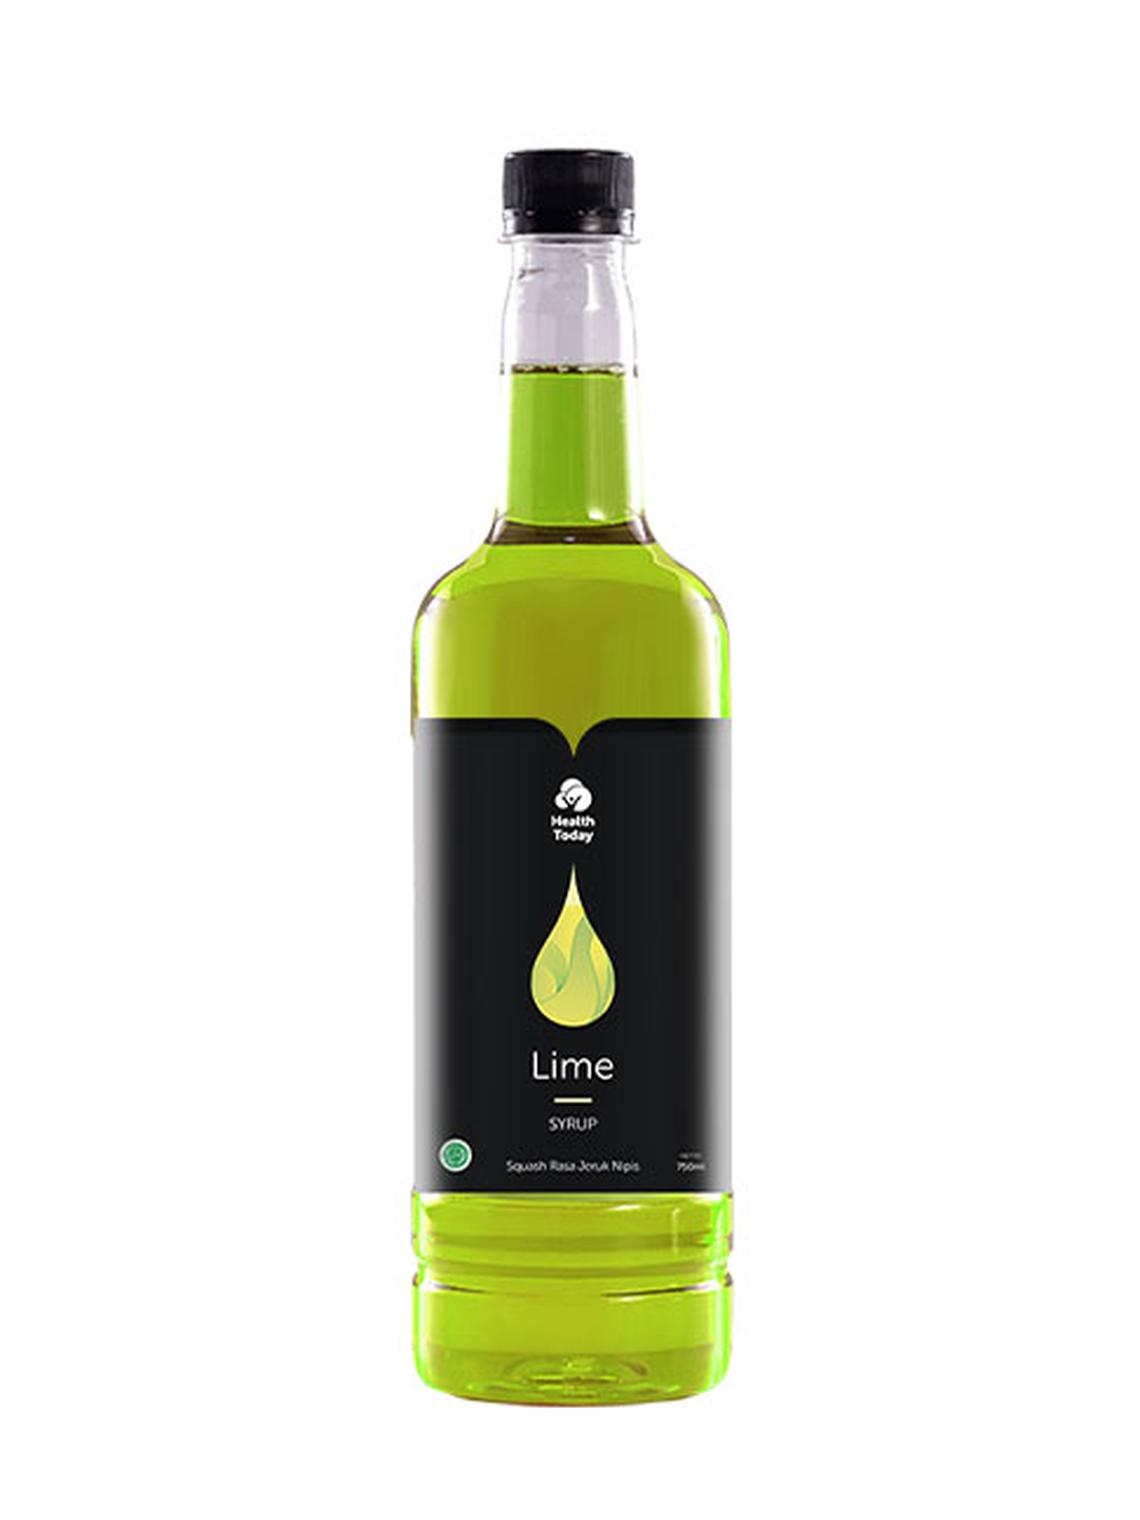 Health Today Syrup Lime 750 ml